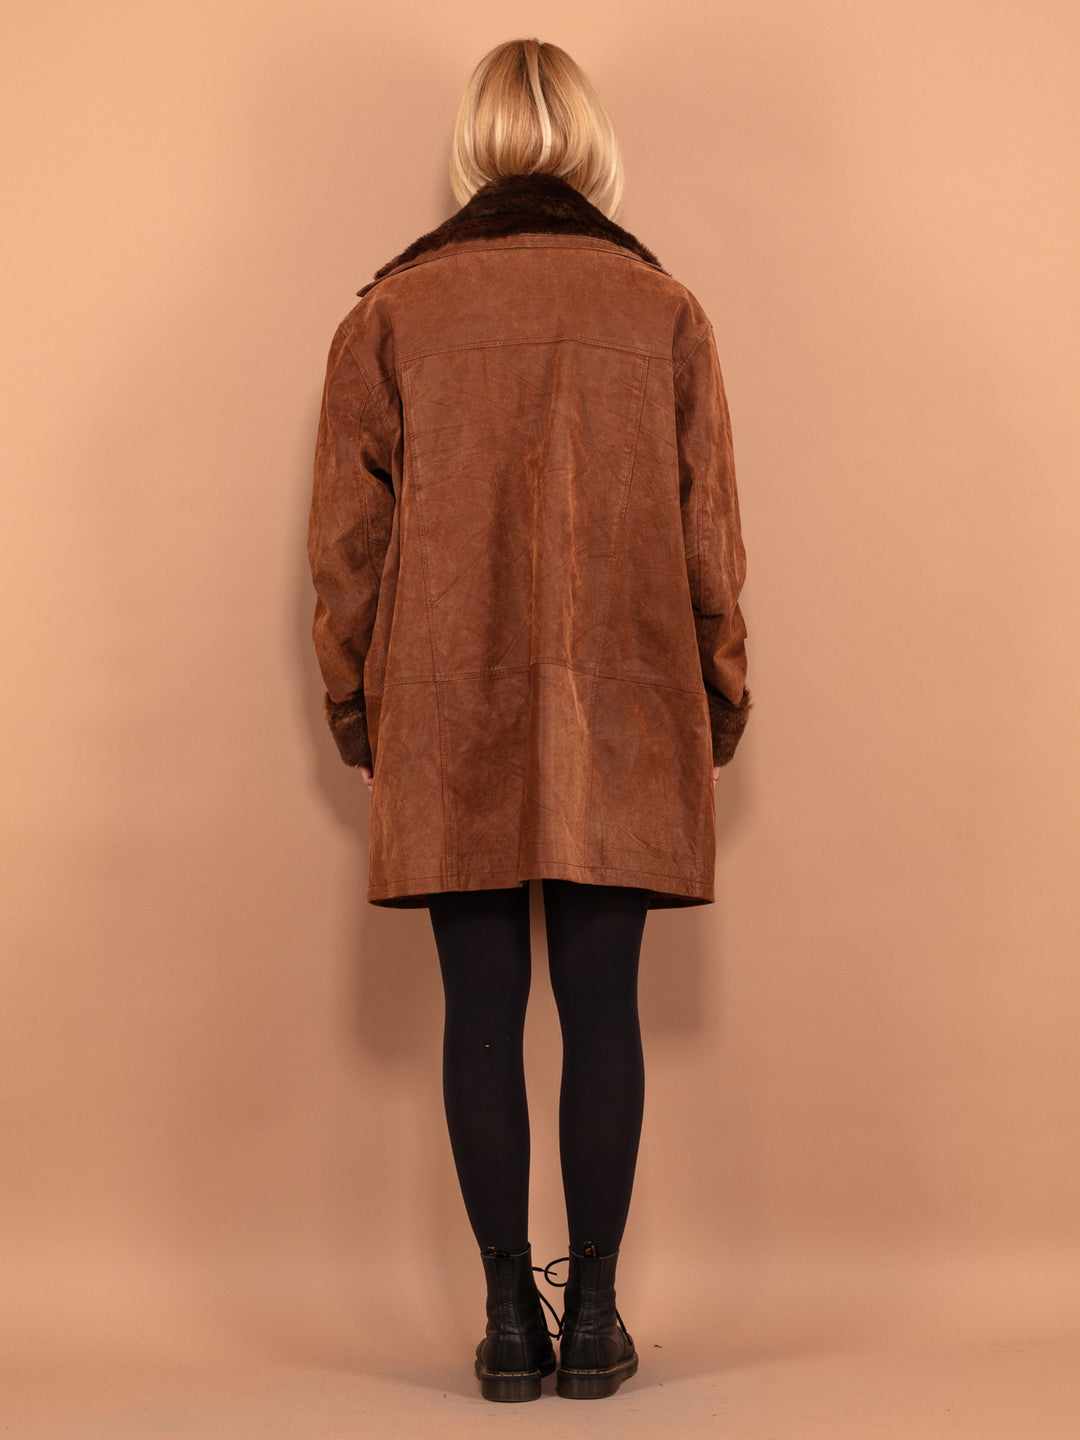 Oversized Suede Coat 90's, Size XXL Brown Suede Coat, Sherpa Suede Coat, Retro Leather Coat,  Faux Shearl Coat, 90s Outerwear, Pre Owned